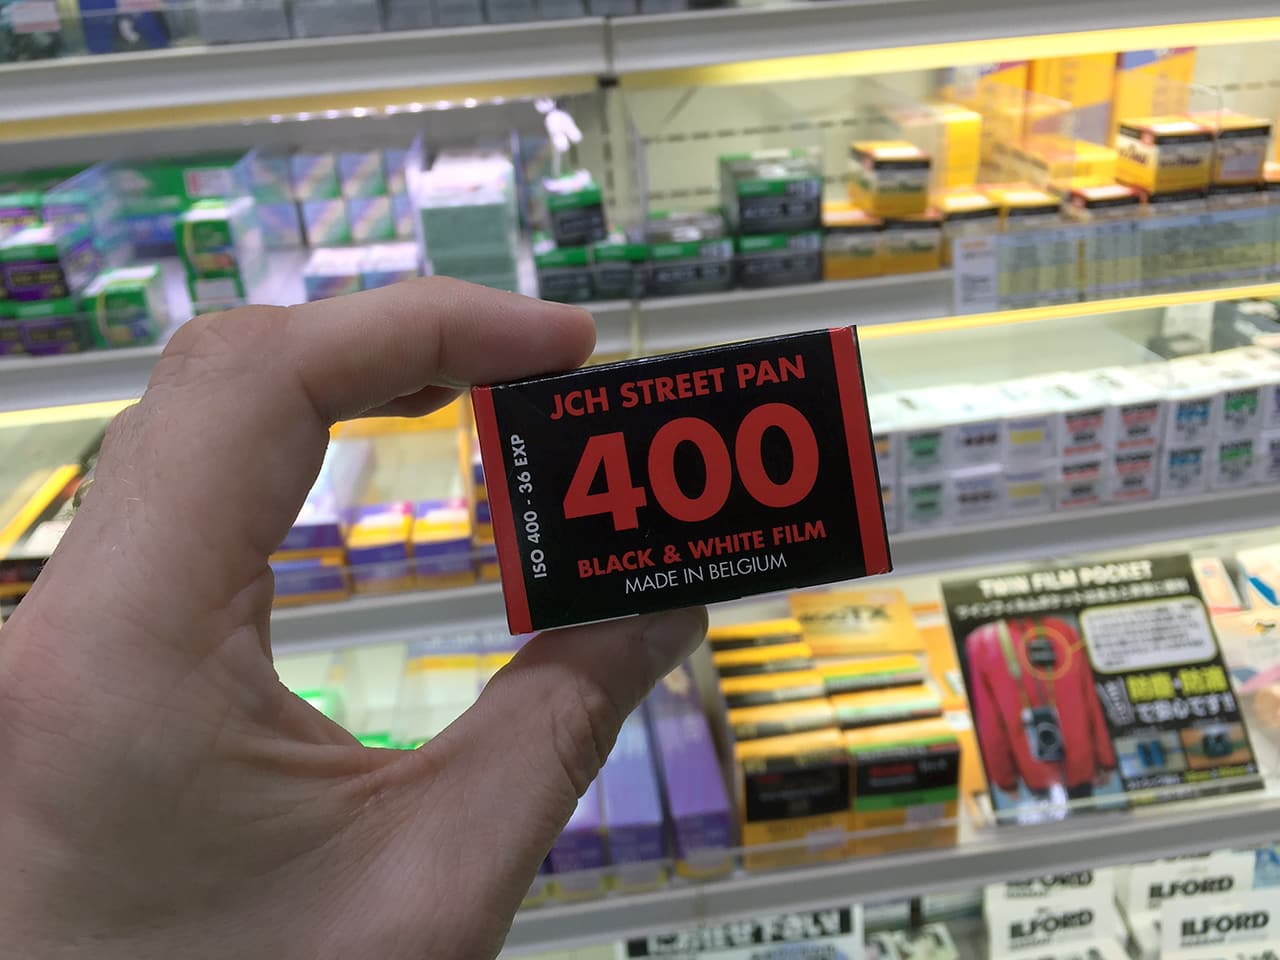 Where can I get JCH StreetPan film?